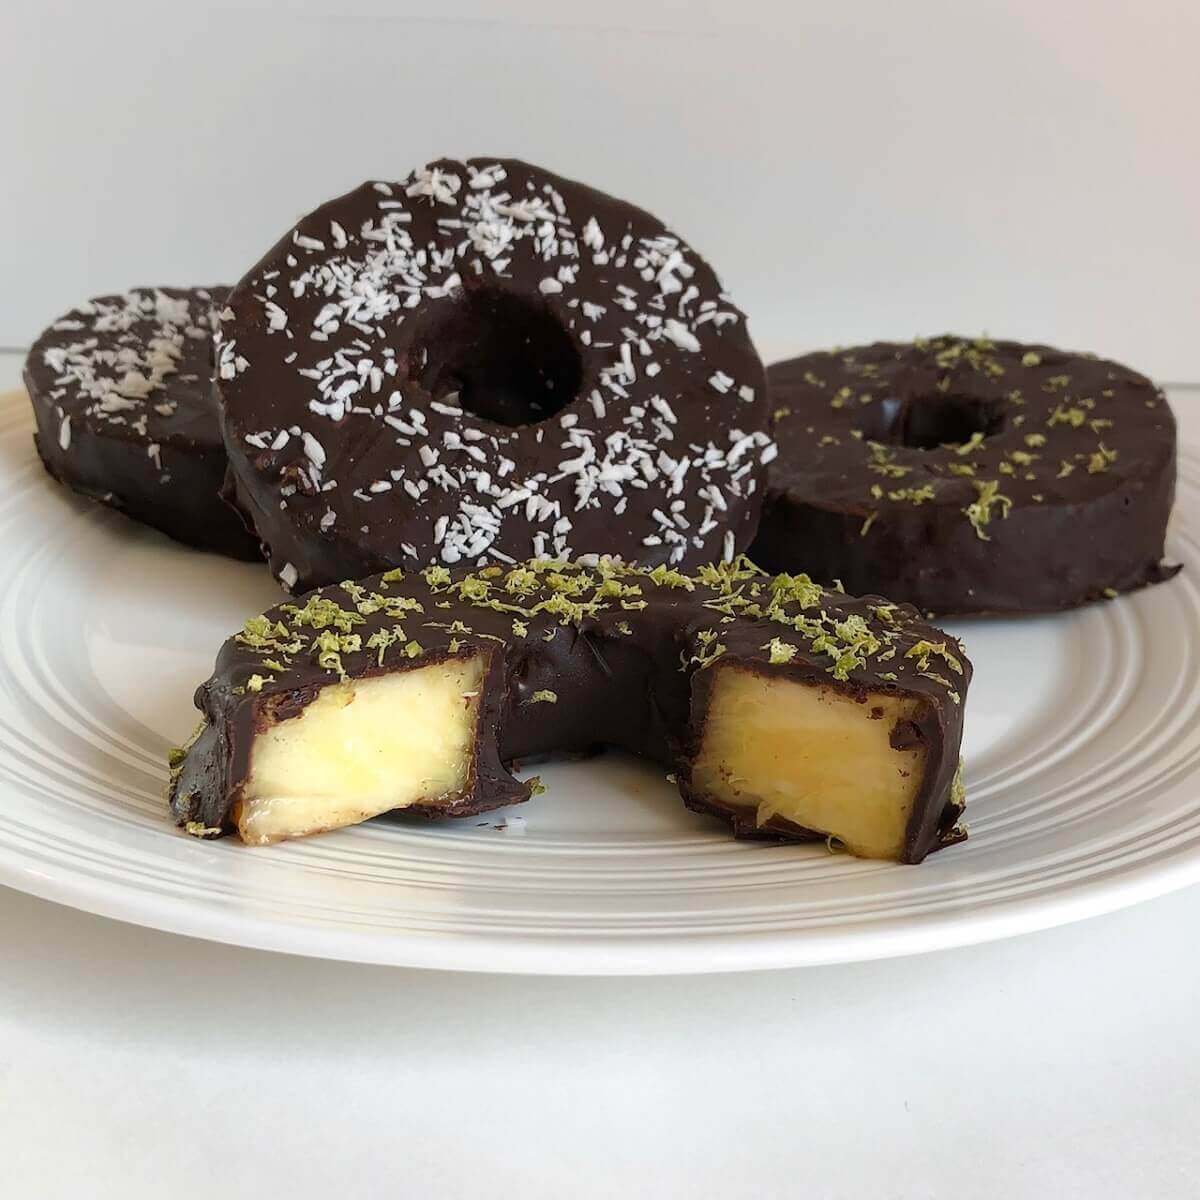 Four pineapple rings covered in chocolate.